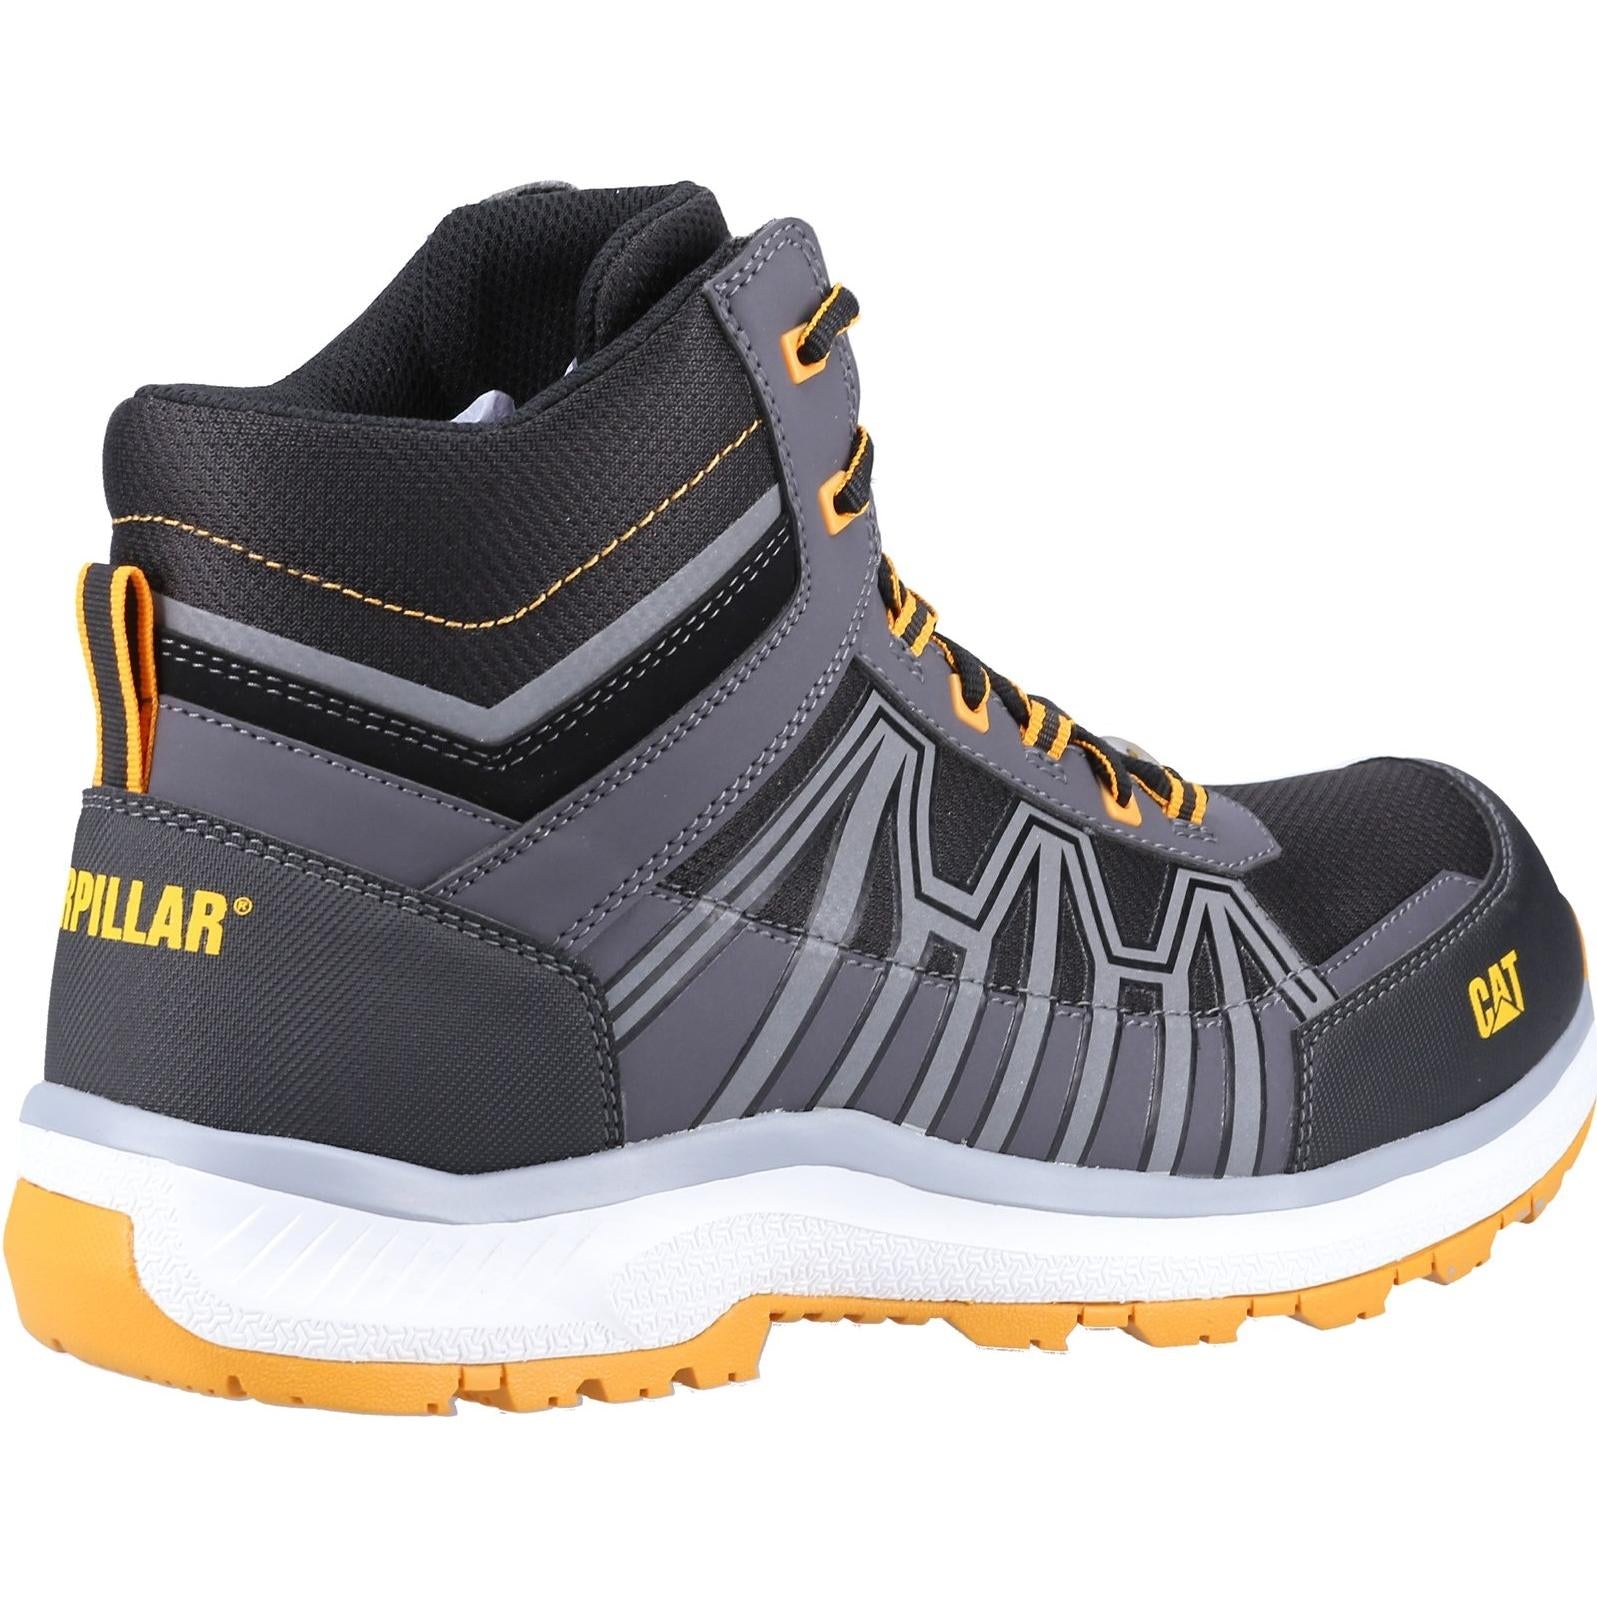 Caterpillar Charge Hiker Boots